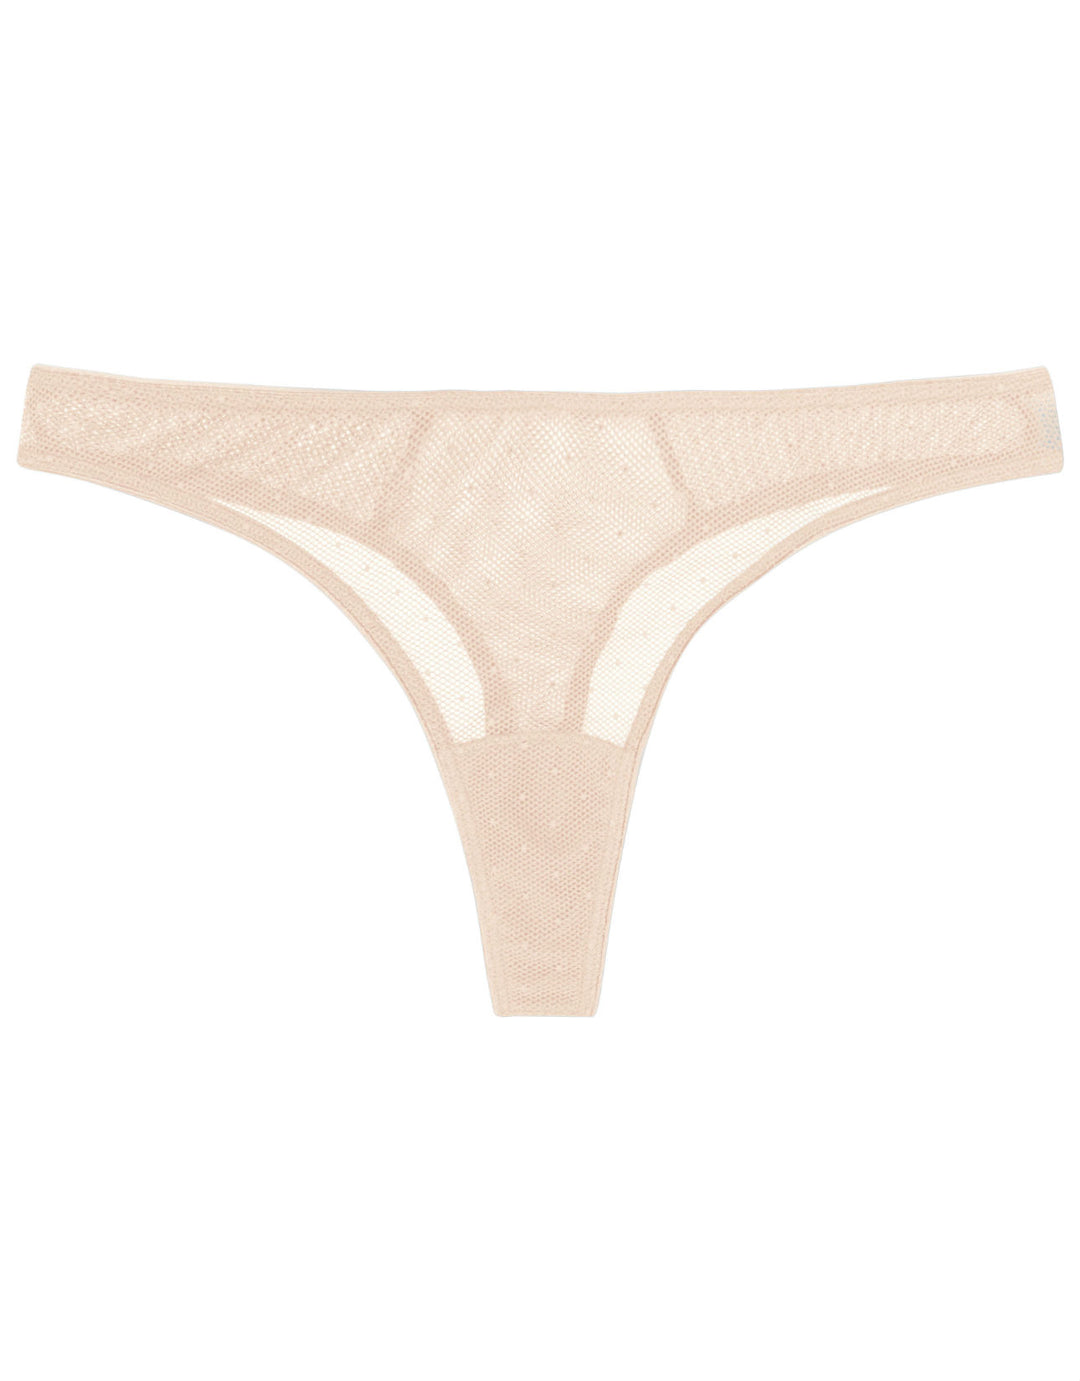 bodas-jabouley-pink-lace-hipster-thong